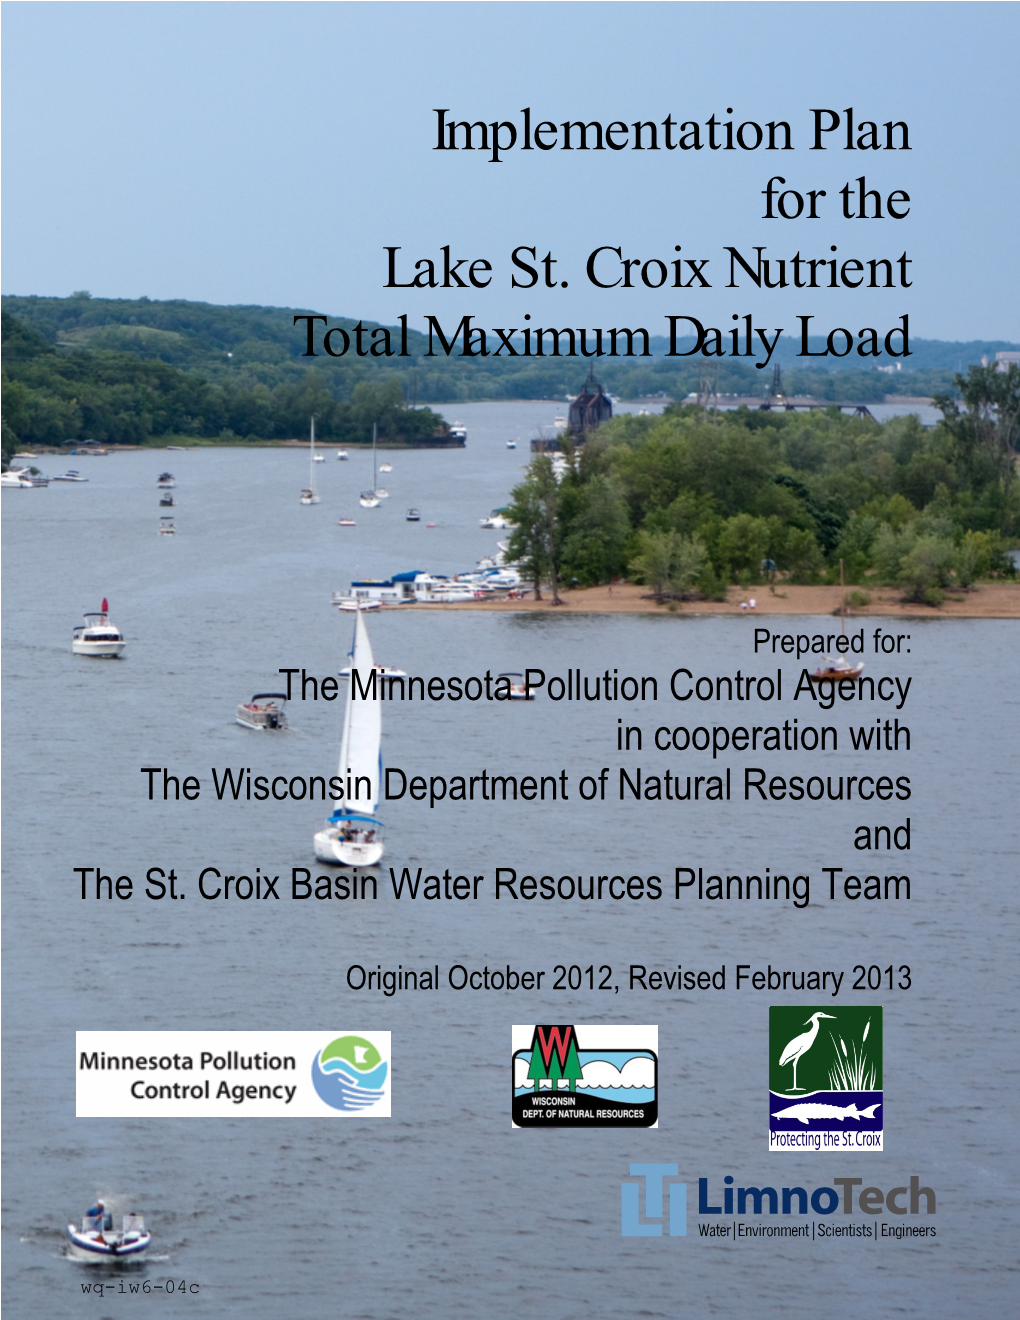 Implementation Plan for the Lake St. Croix Nutrient Total Maximum Daily Load